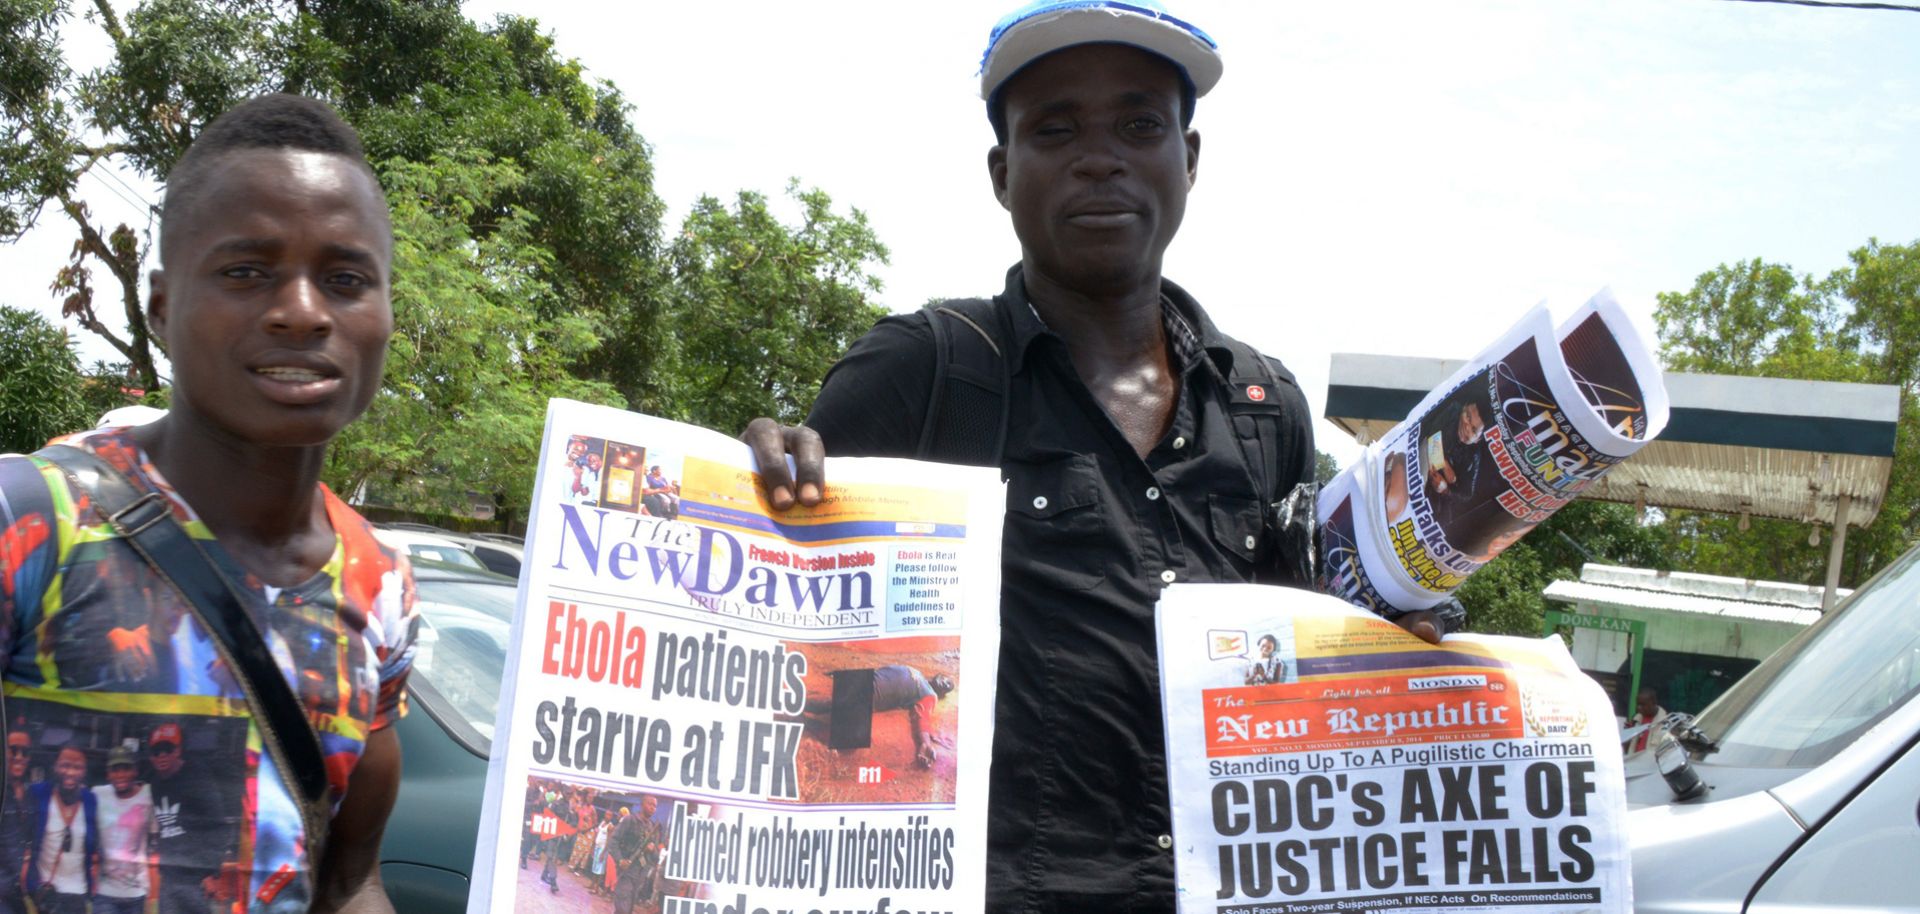 Media coverage of Ebola in West Africa